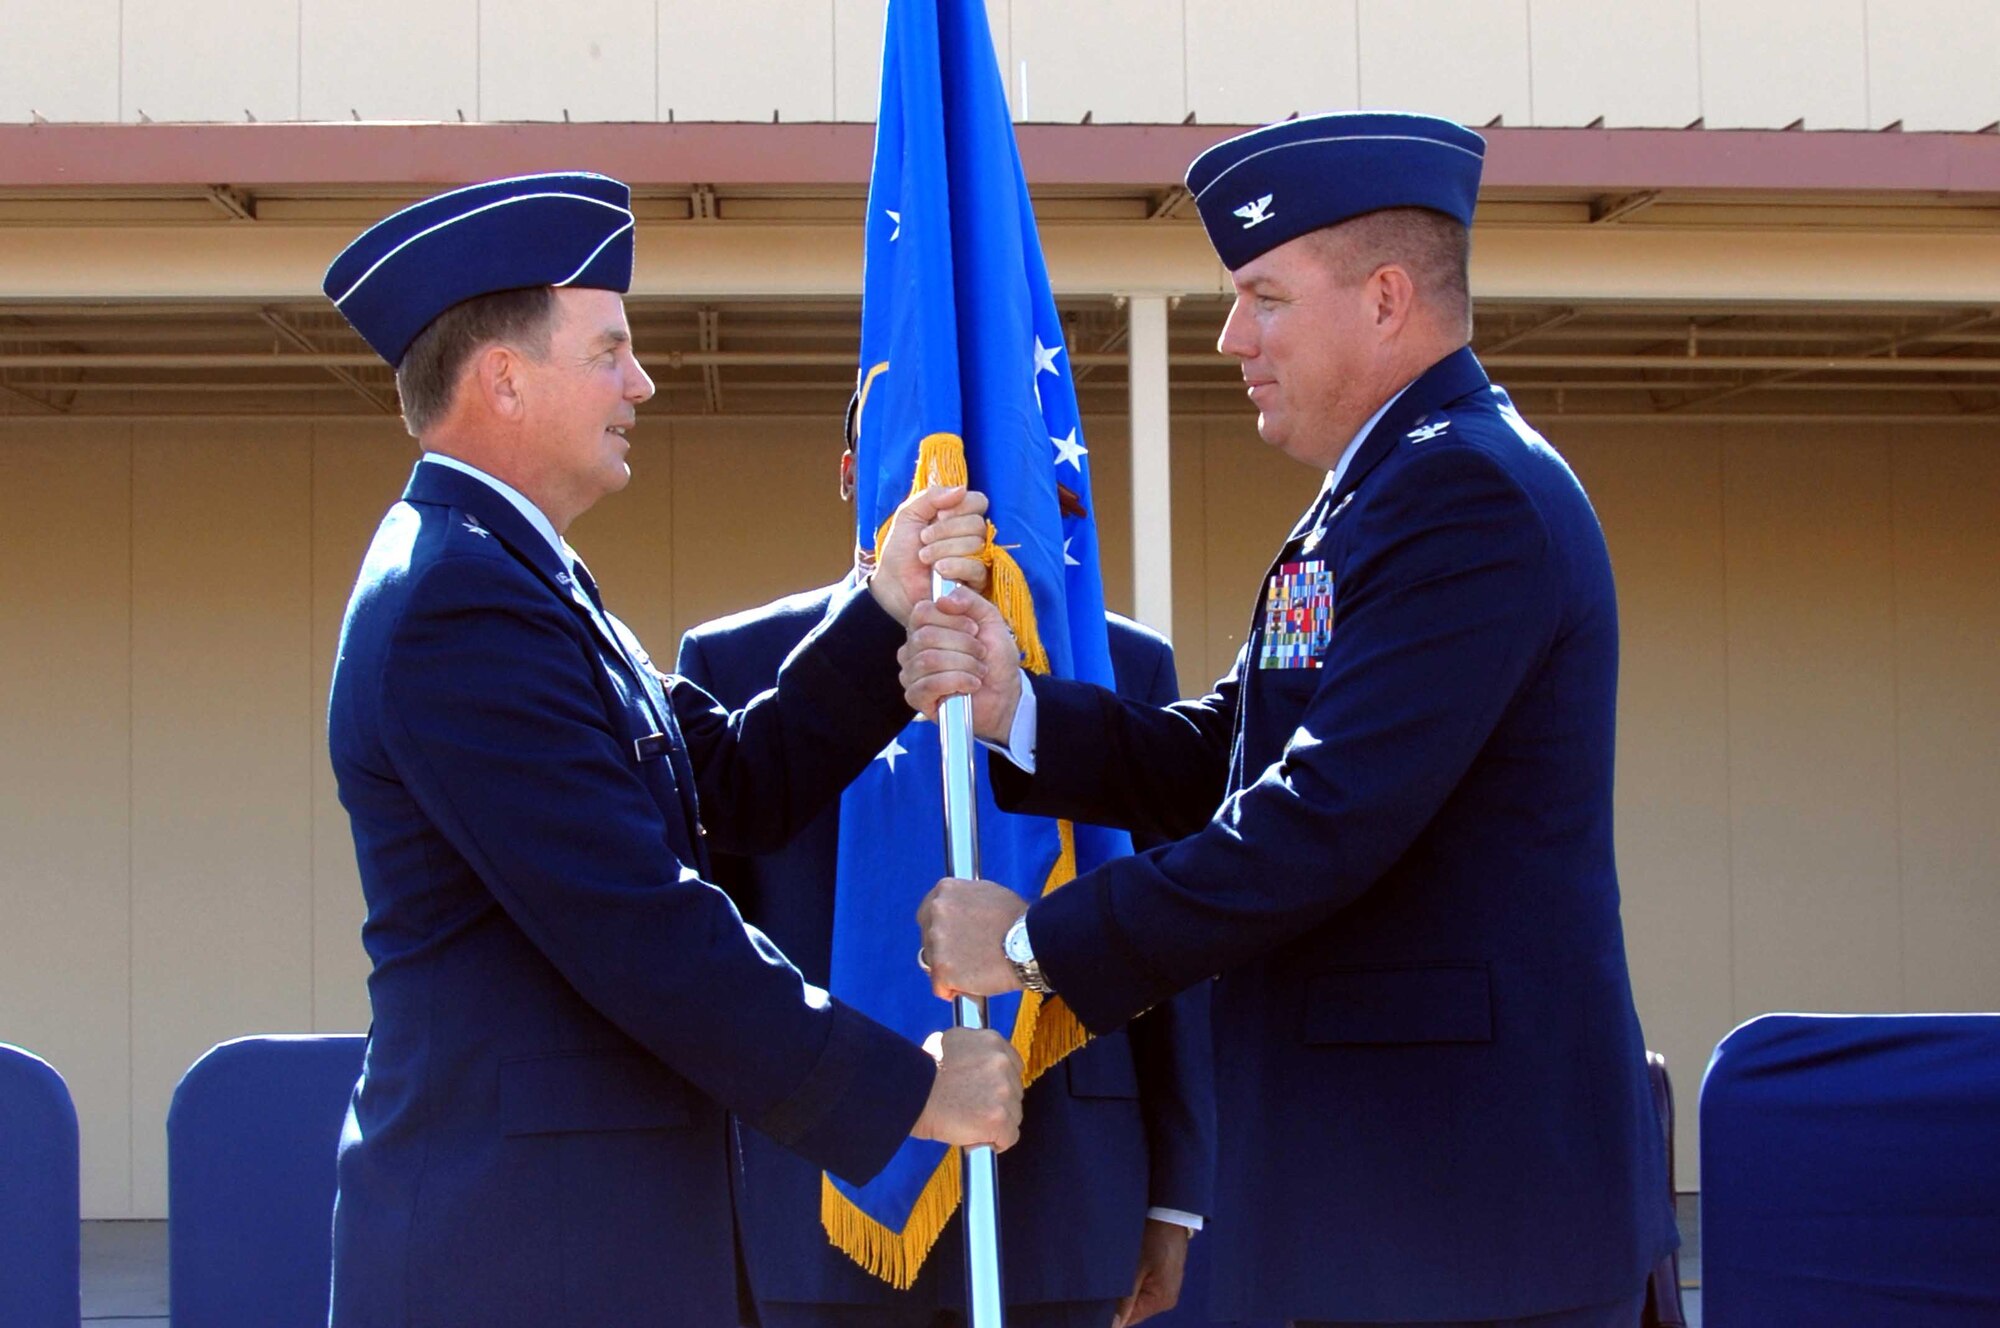 Brig. Gen. Mark Stearns, 15th Expeditionary Mobility Task Force commander, hands the 615th Contingency Response Wing guideon to the wing’s new commander Col. John Lipinski during a change-of-command ceremony Sept. 23. (U.S. Air Force photo/Nan Wylie)